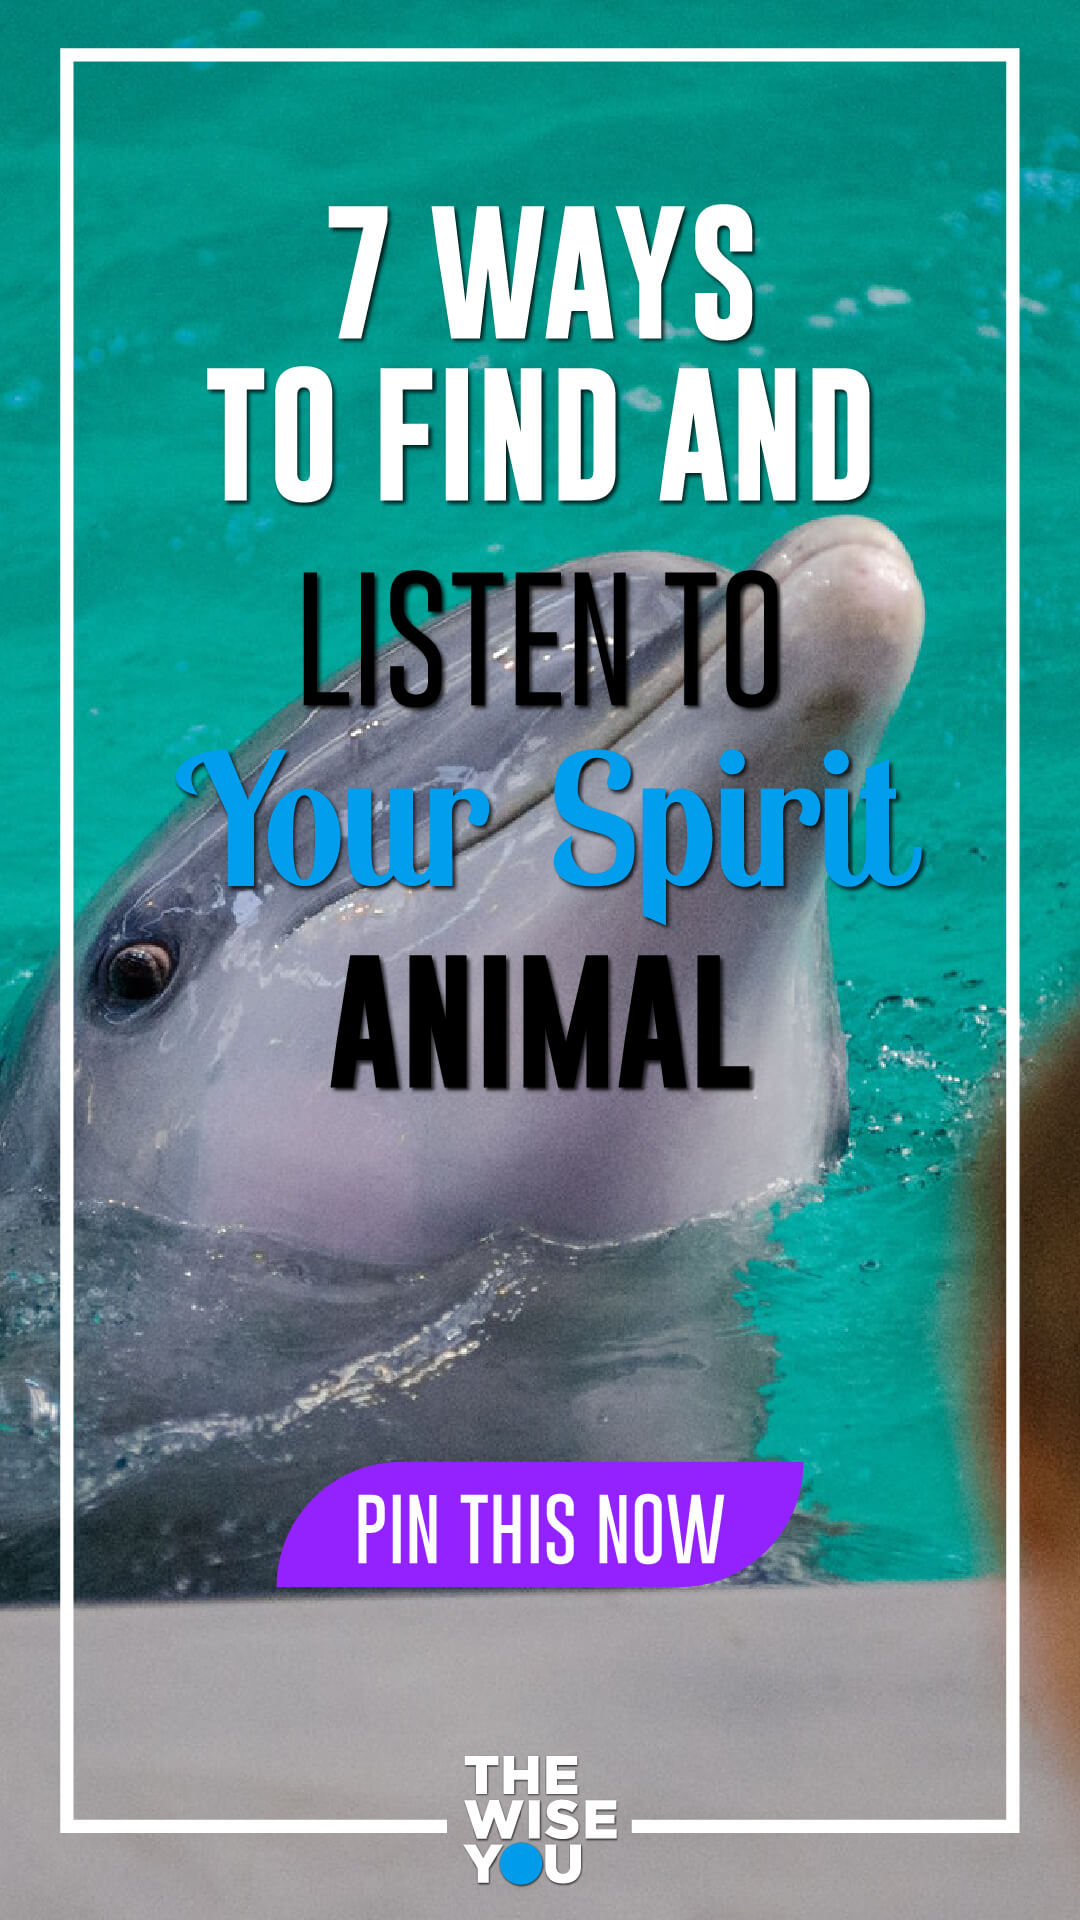 7 Ways to Find and Listen to Your Spirit Animal